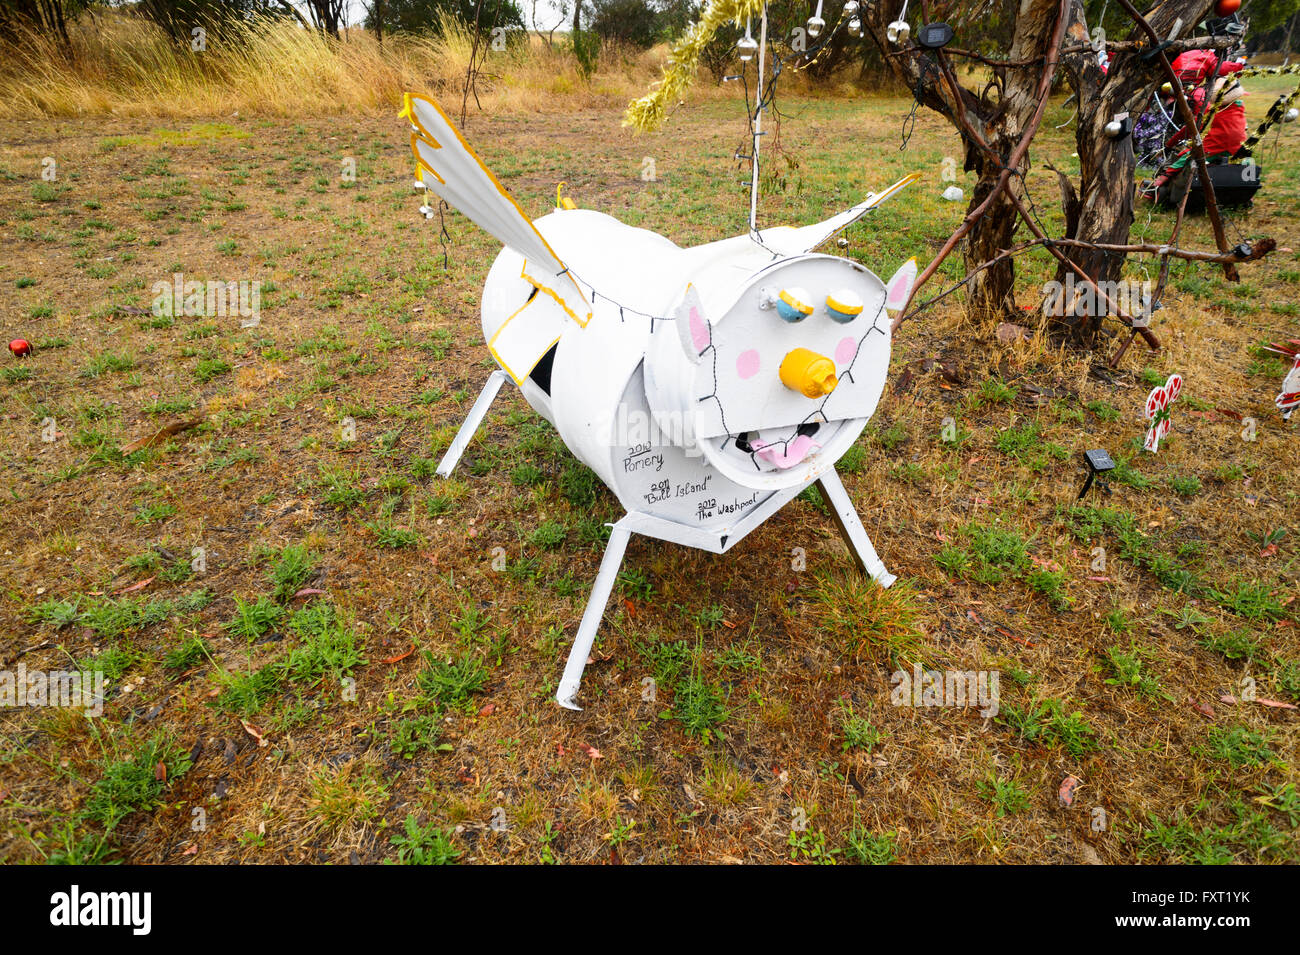 Flying Pigs Letterbox in the Outback, South Australia Stock Photo